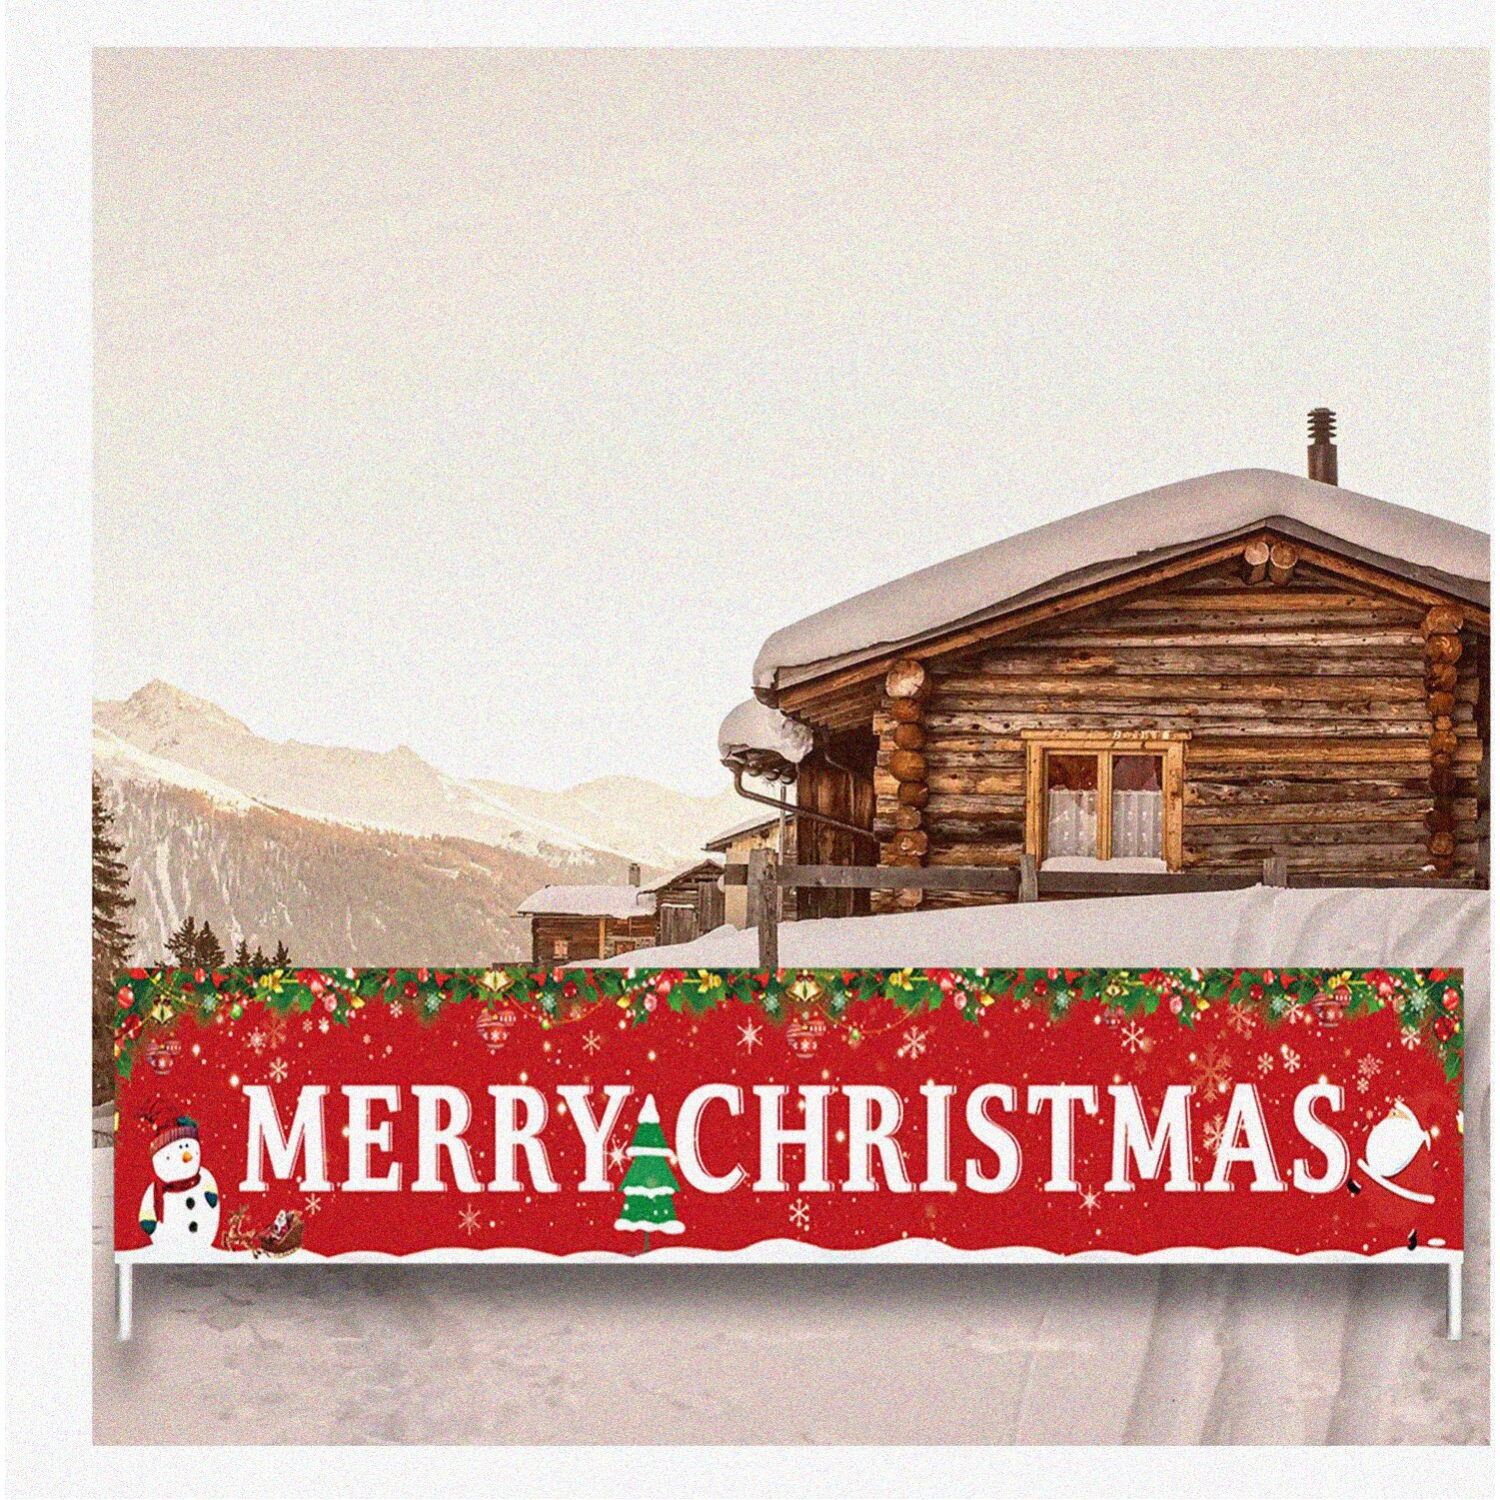 MerryXmas Mega Banner - Festive Outdoor & Indoor Hanging Decor for Xmas Home Party & Tree - Huge Xmas Sign & Decoration